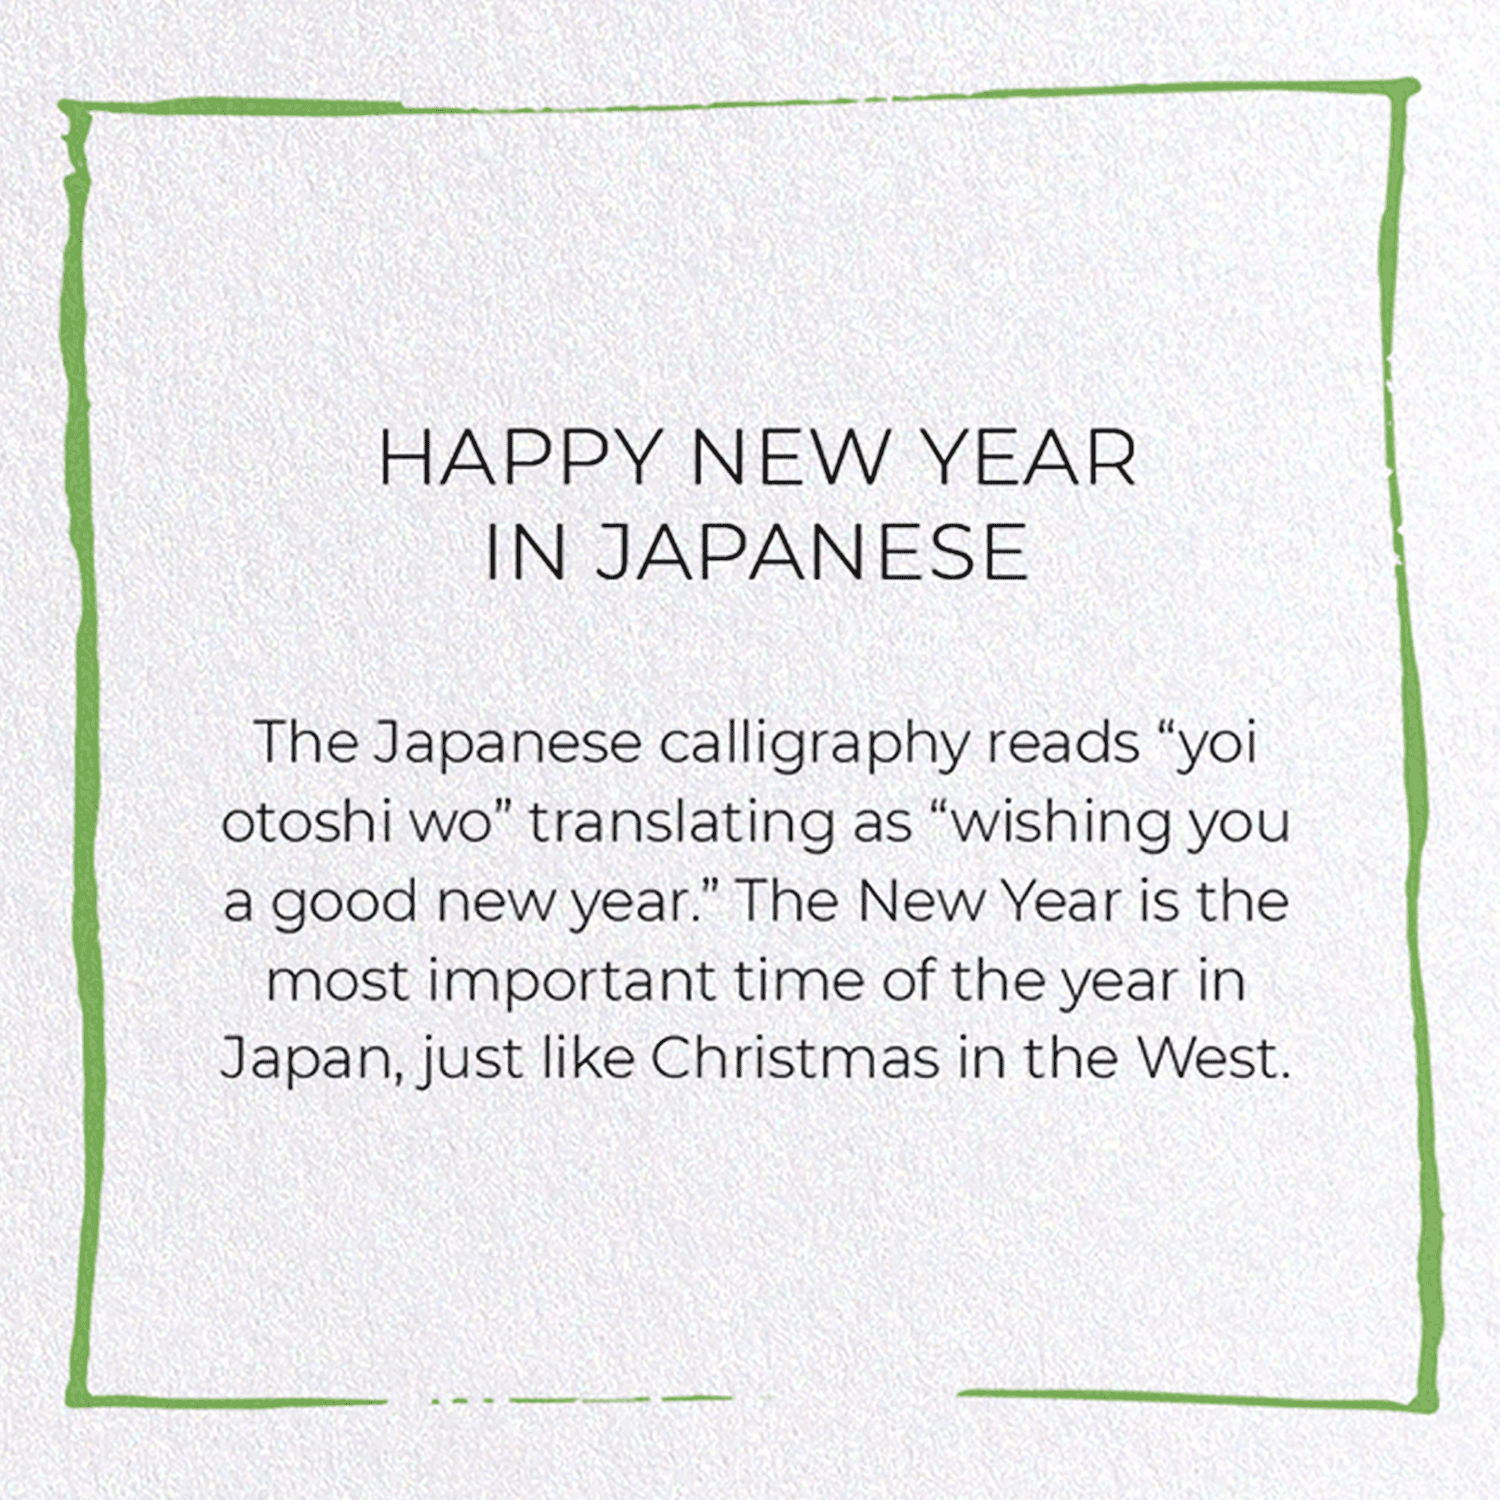 HAPPY NEW YEAR IN JAPANESE